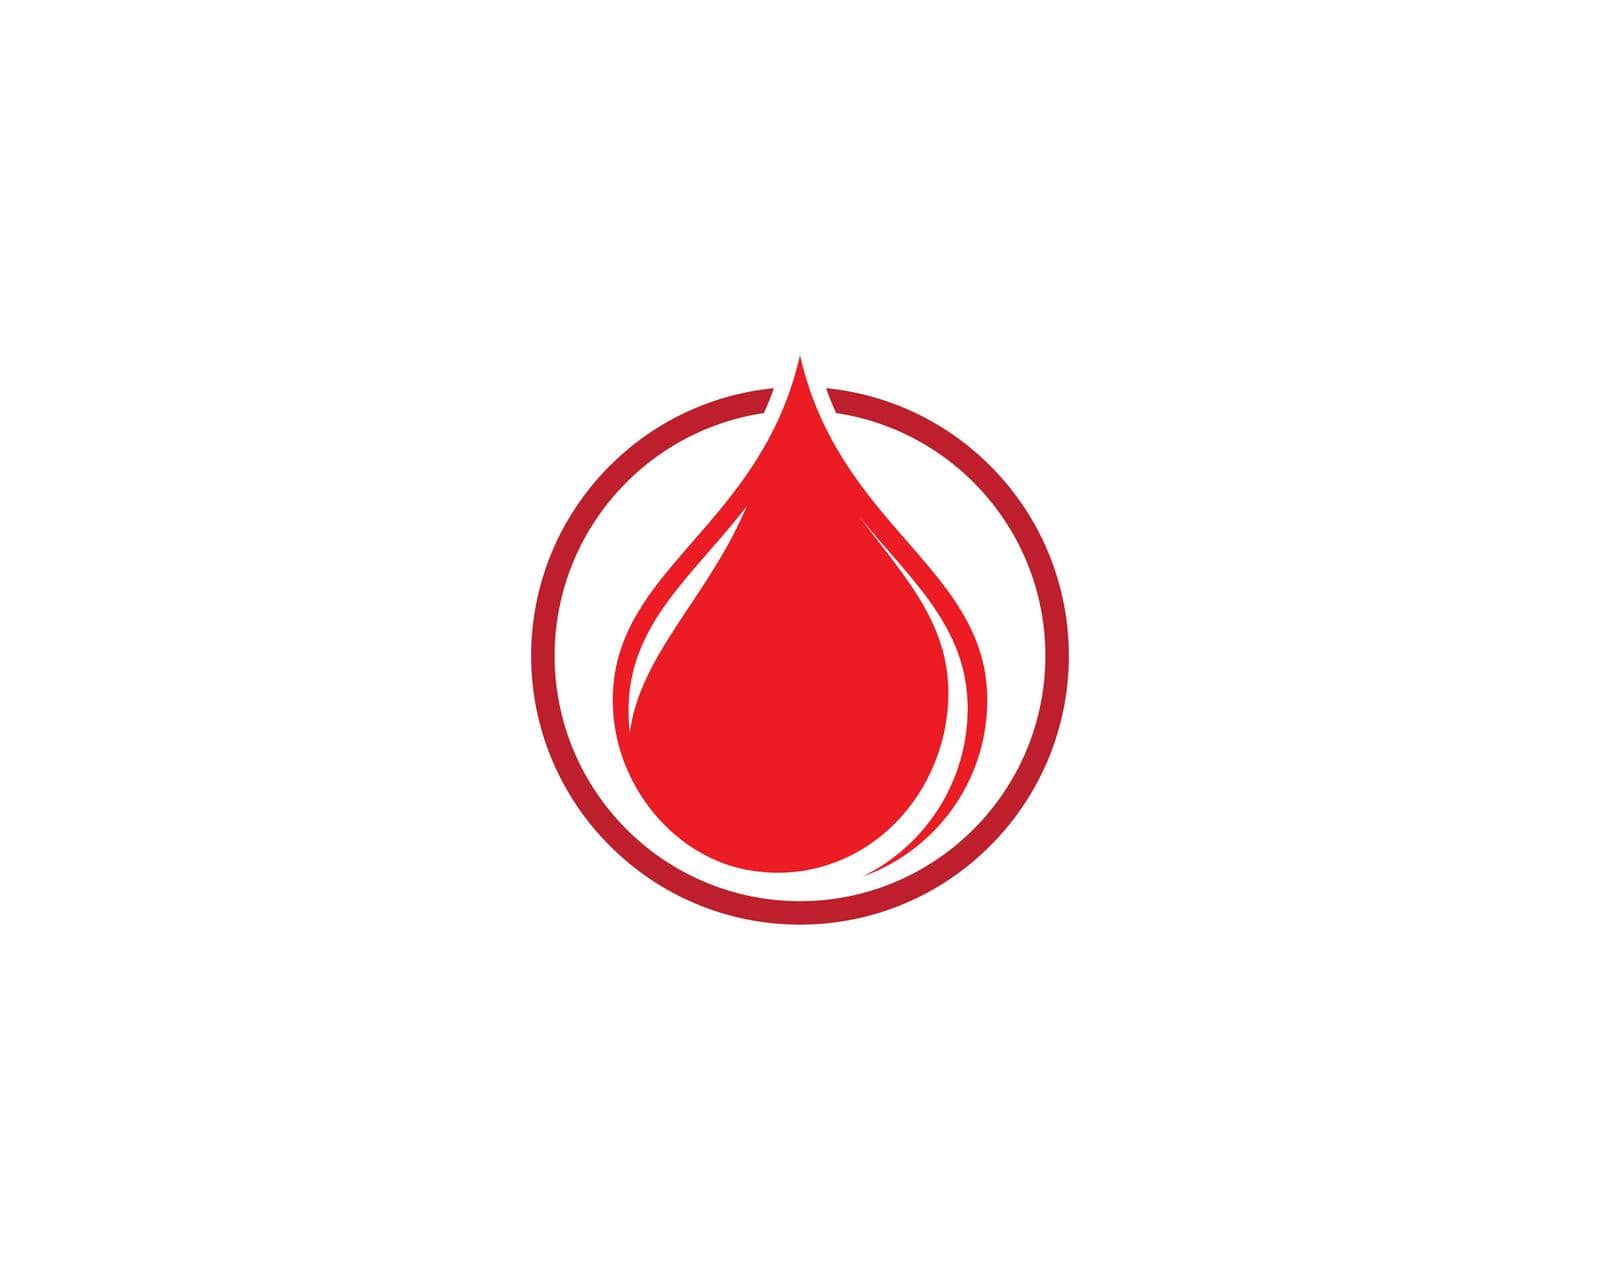 Blood vector icon illustration design by Fat17